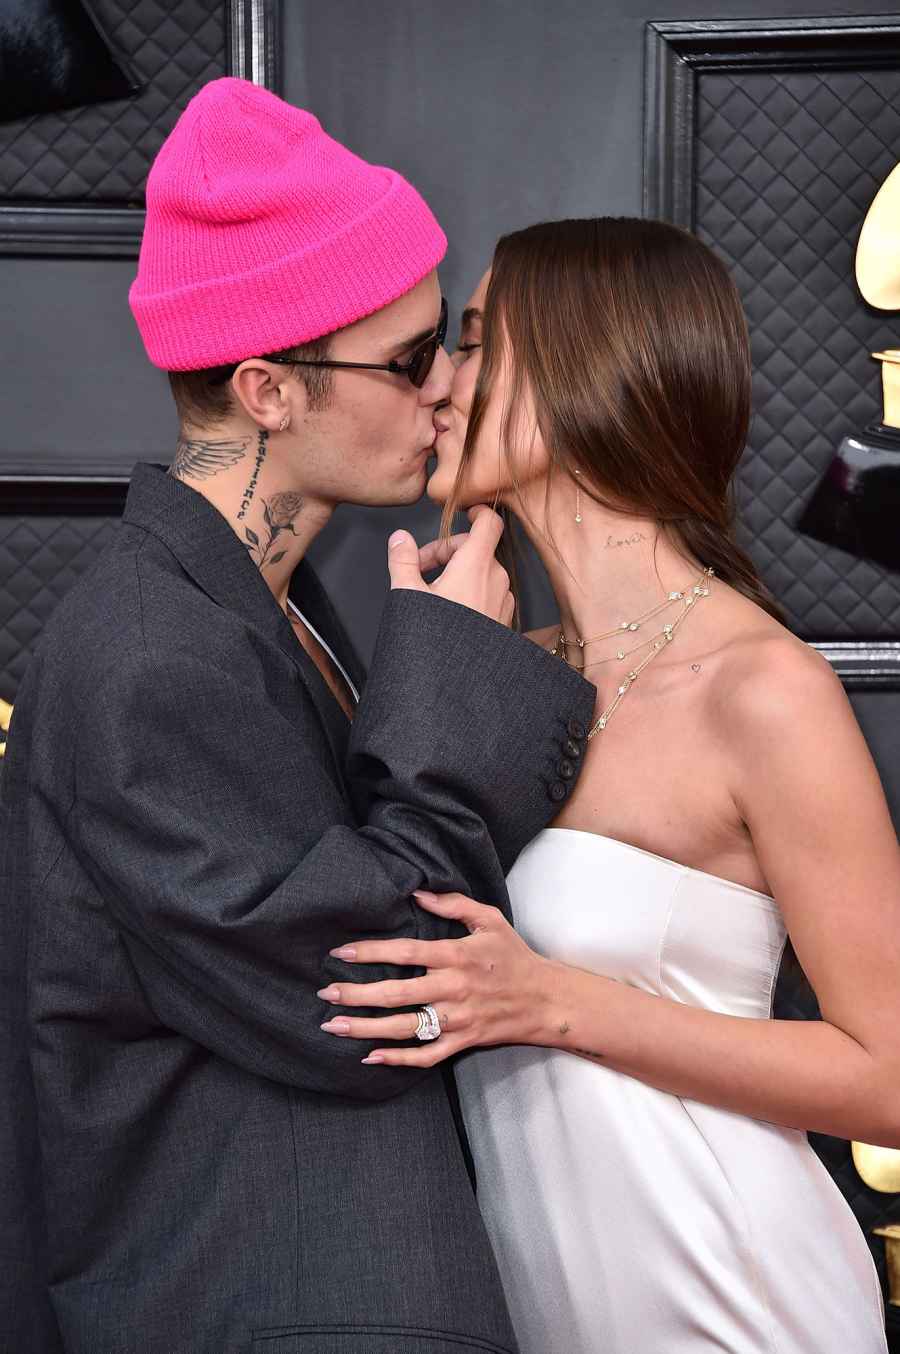 Justin Bieber and Wife Hailey Baldwin Attend 2022 Grammys Following Her Health Scare